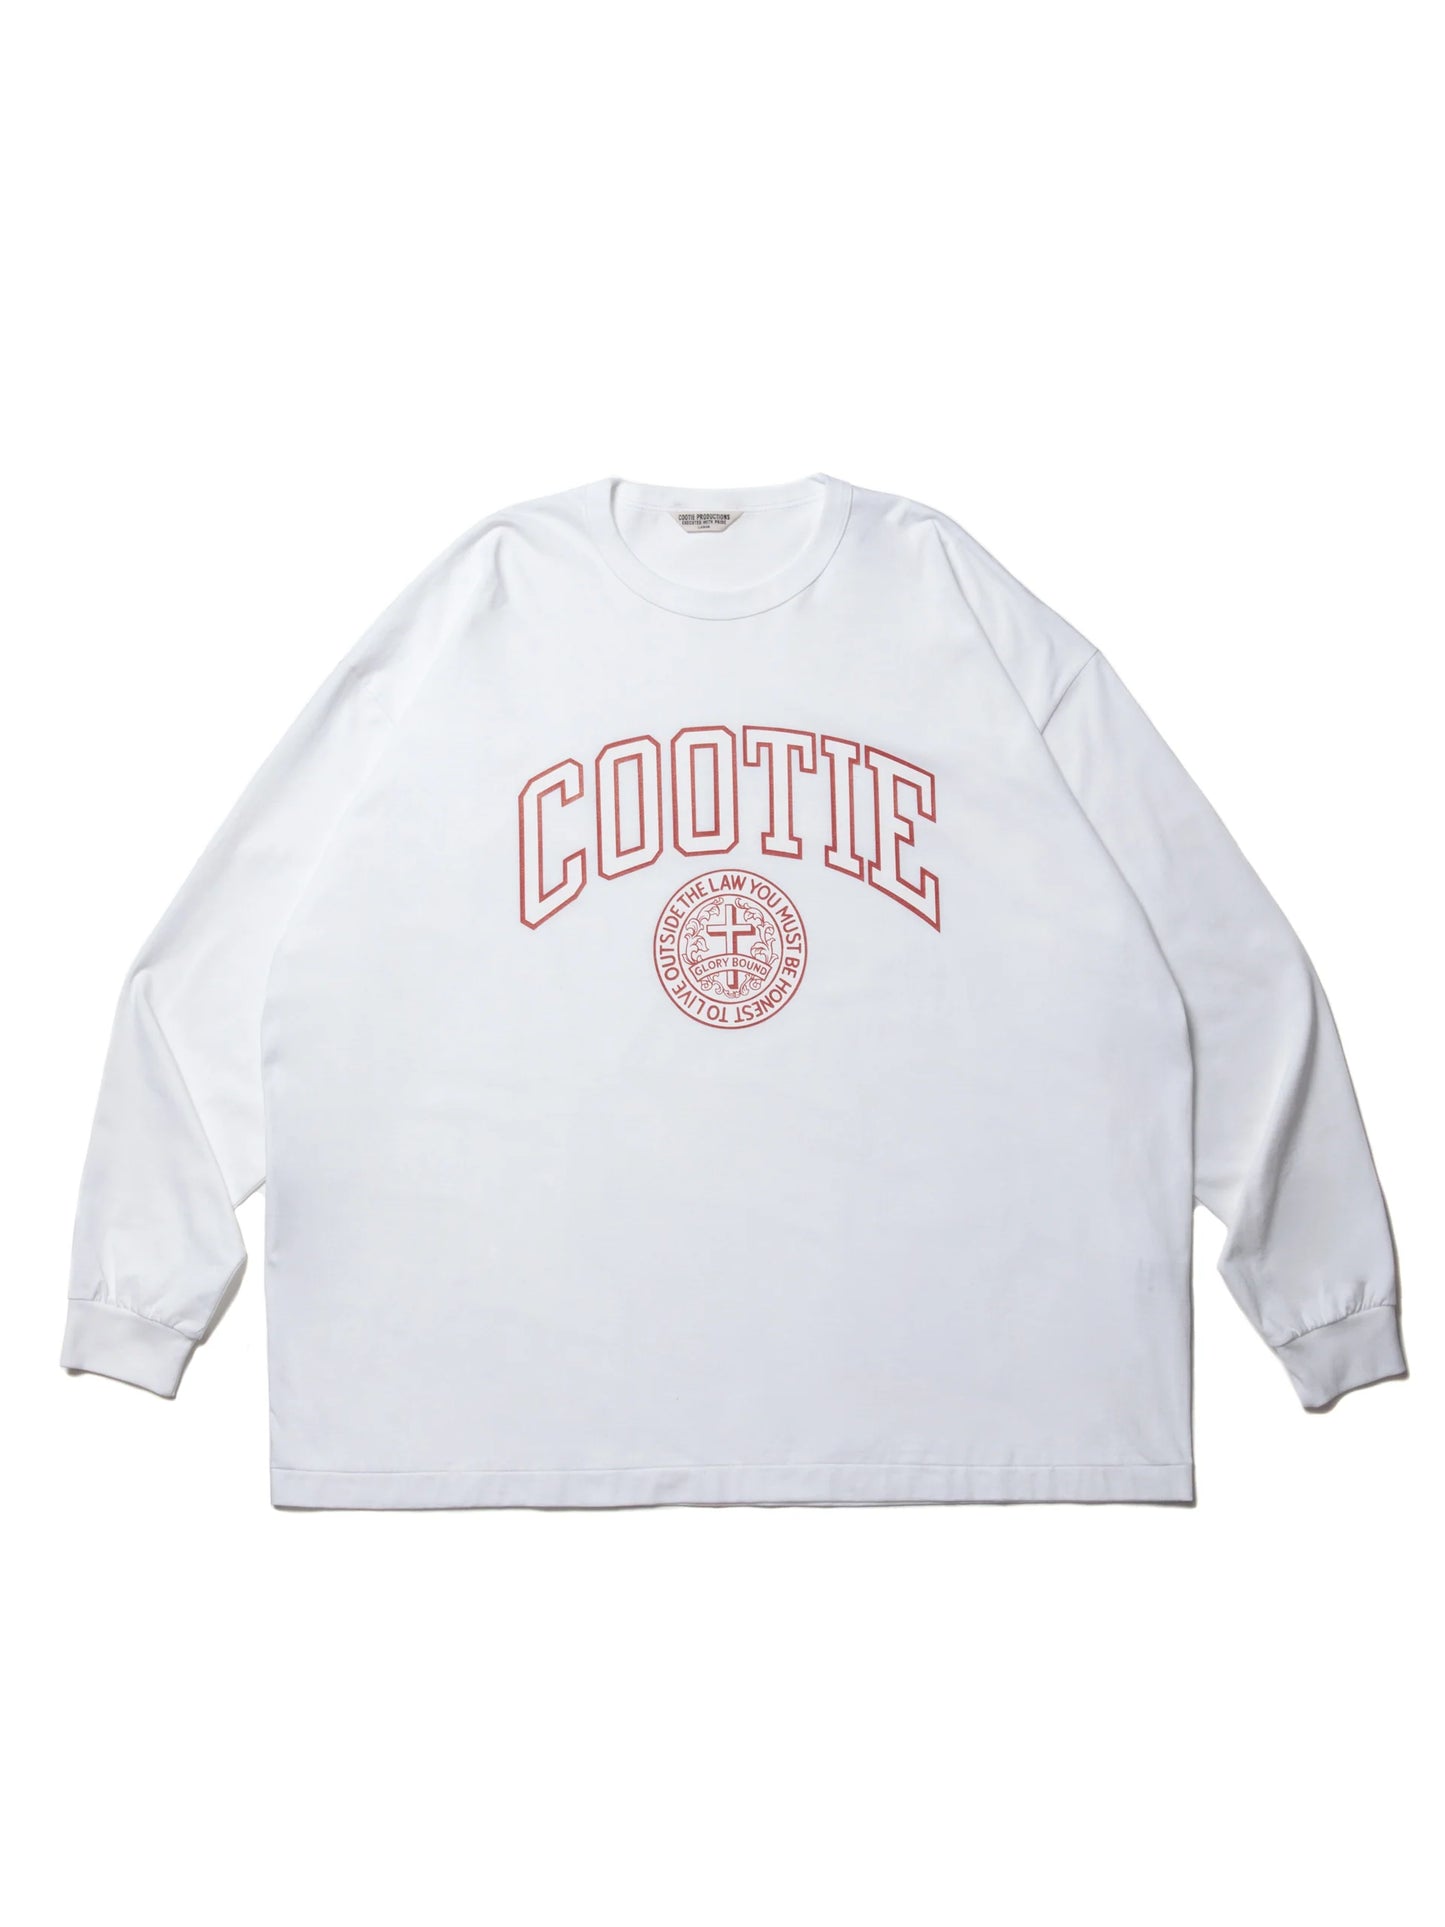 COOTIE PRODUCTIONS PRINT OVERSIZED L/S TEE (COLLEGE) – unexpected